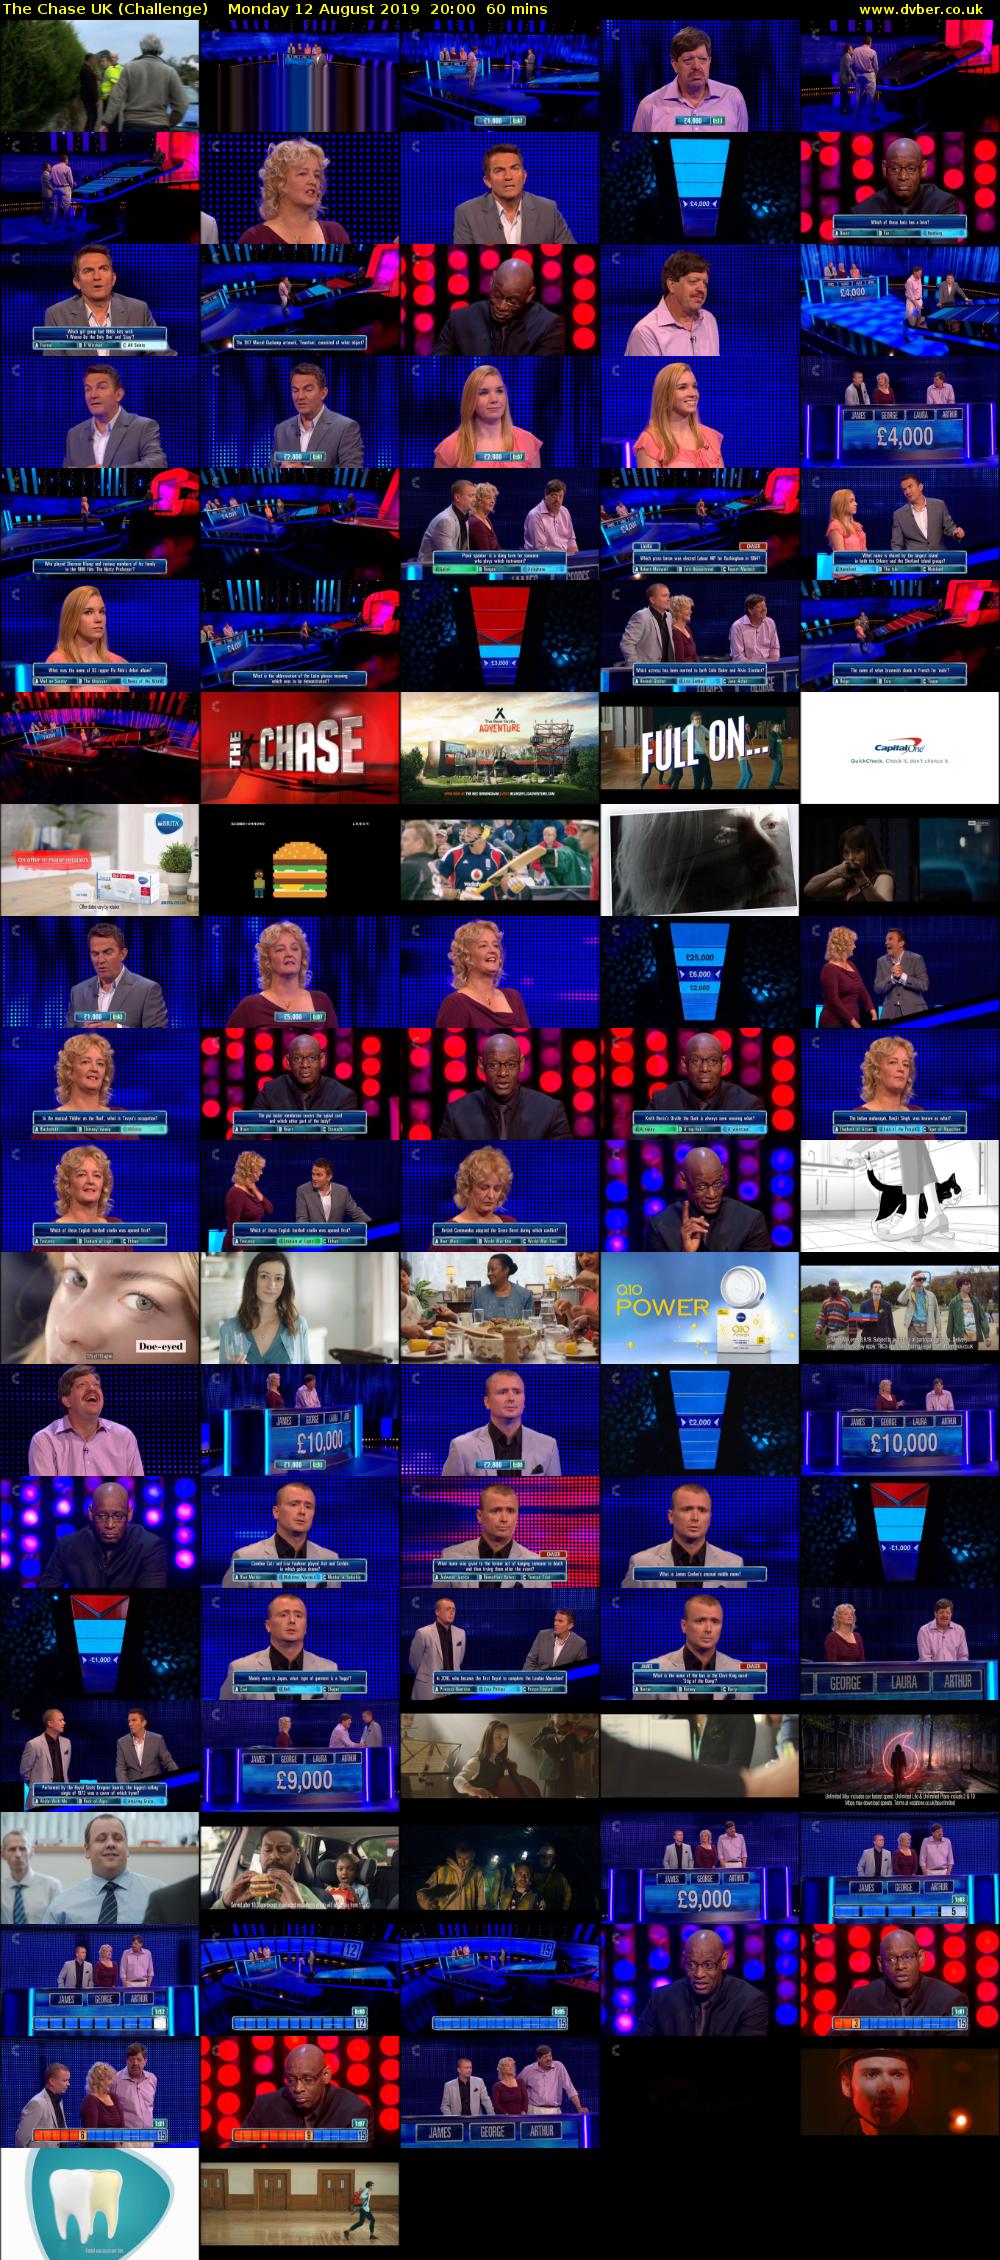 The Chase UK (Challenge) Monday 12 August 2019 20:00 - 21:00